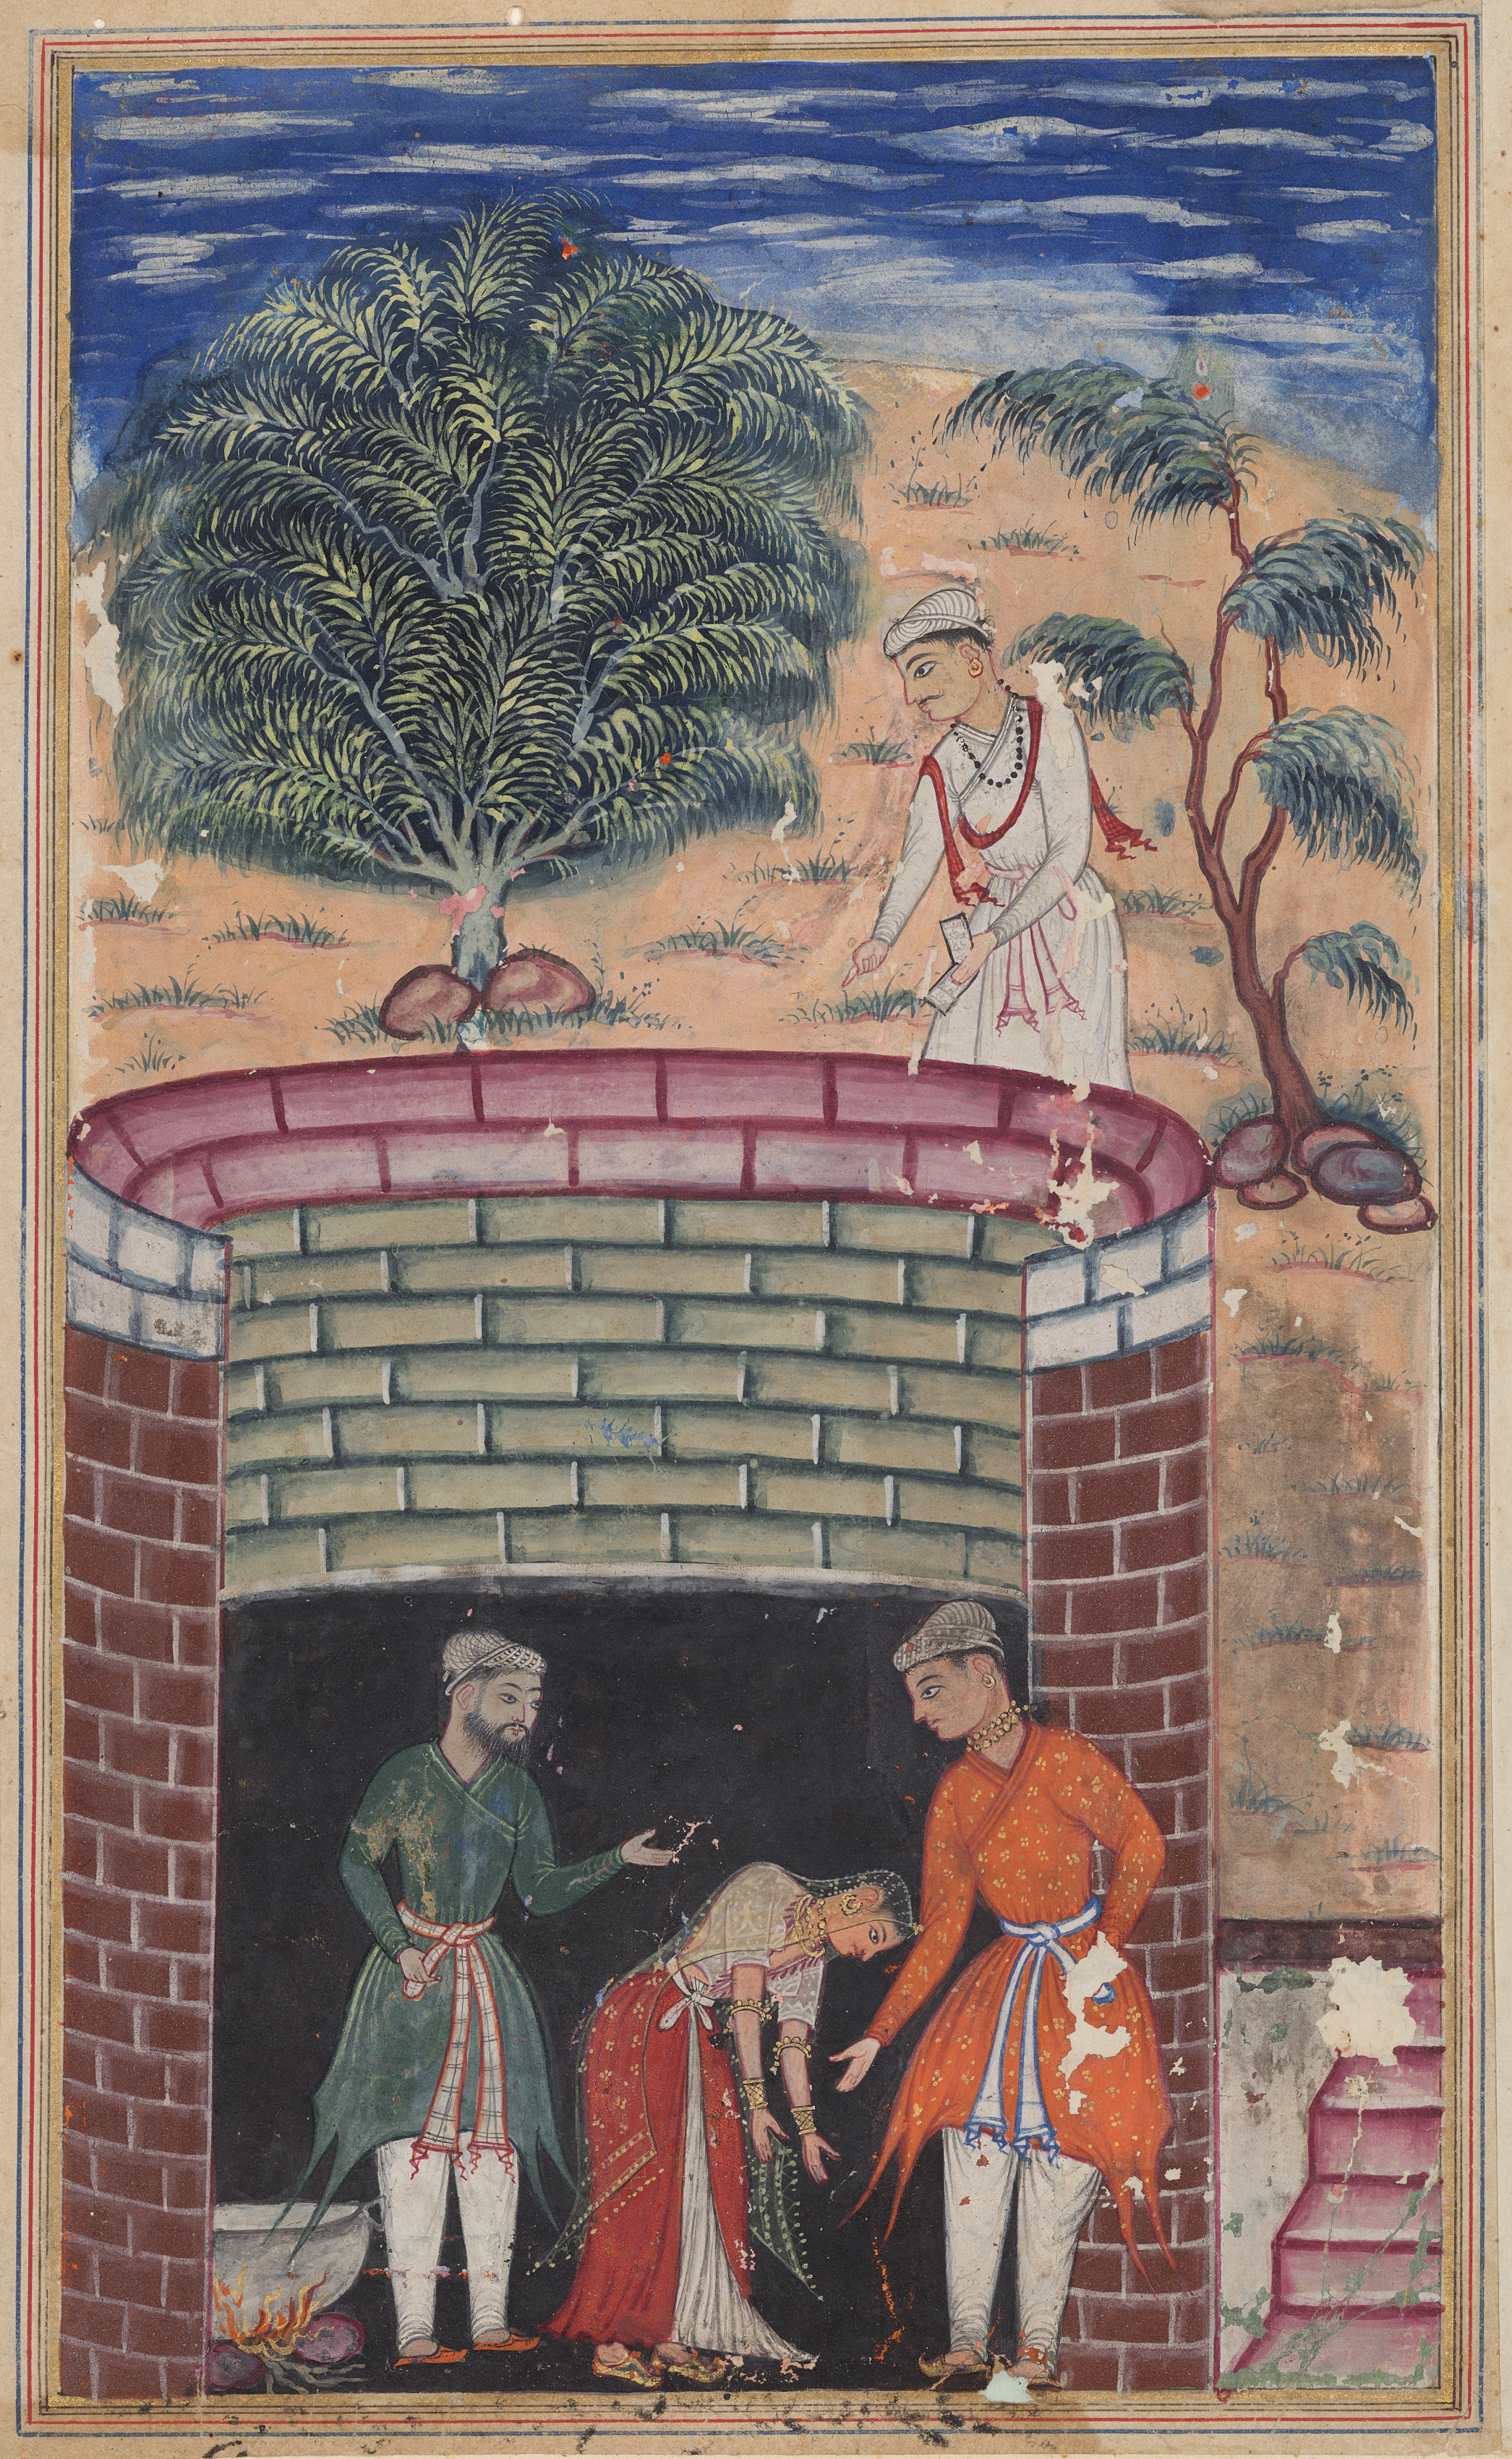 The daughter of the king of the jinns bows before the King of Kings who has just undergone the ordeal of passing through the boiling oil to emerge as a youth, from a Tuti-nama (Tales of a Parrot): Seventh Night